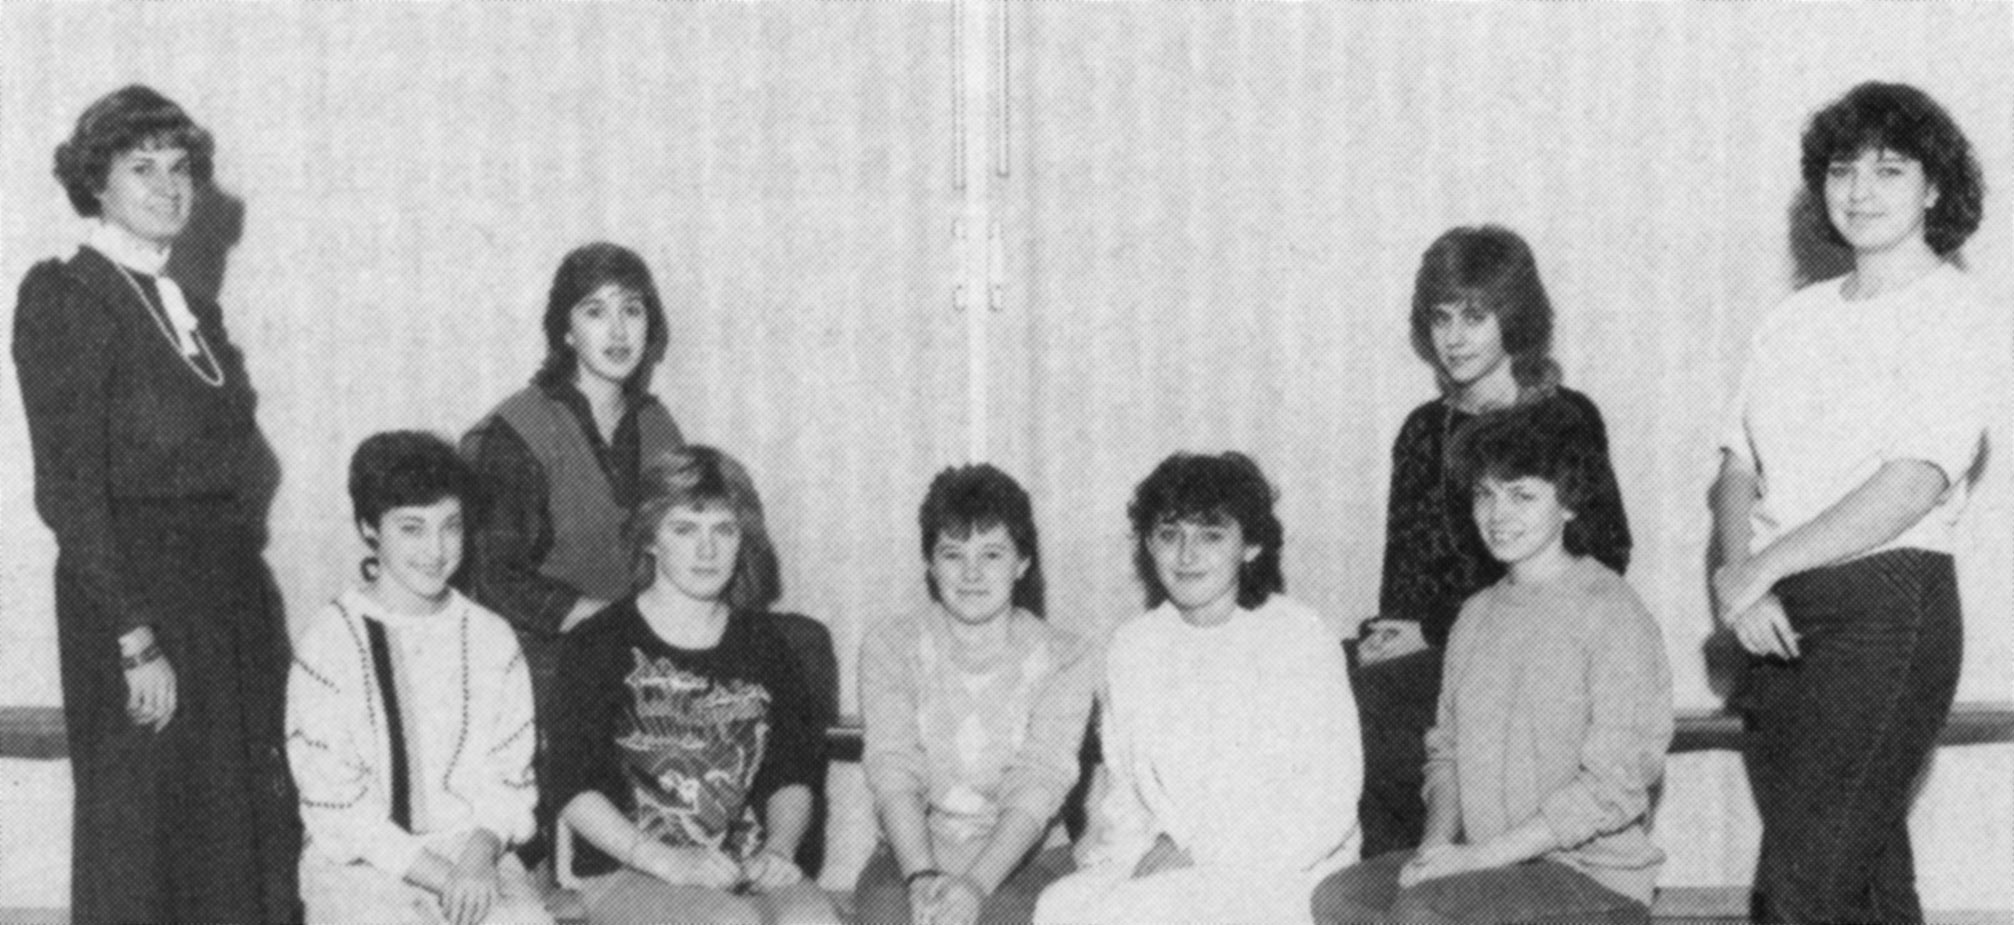 (Click to magnify) FRONT ROW: Ms. S. Darby, Carol Ann Rowland, Kris Westwood, Rhonda Downs, Tabitha Wilkinson, Kelly Clementson; ***BACK ROW: Michelle Noble, Sue Pullwitt.